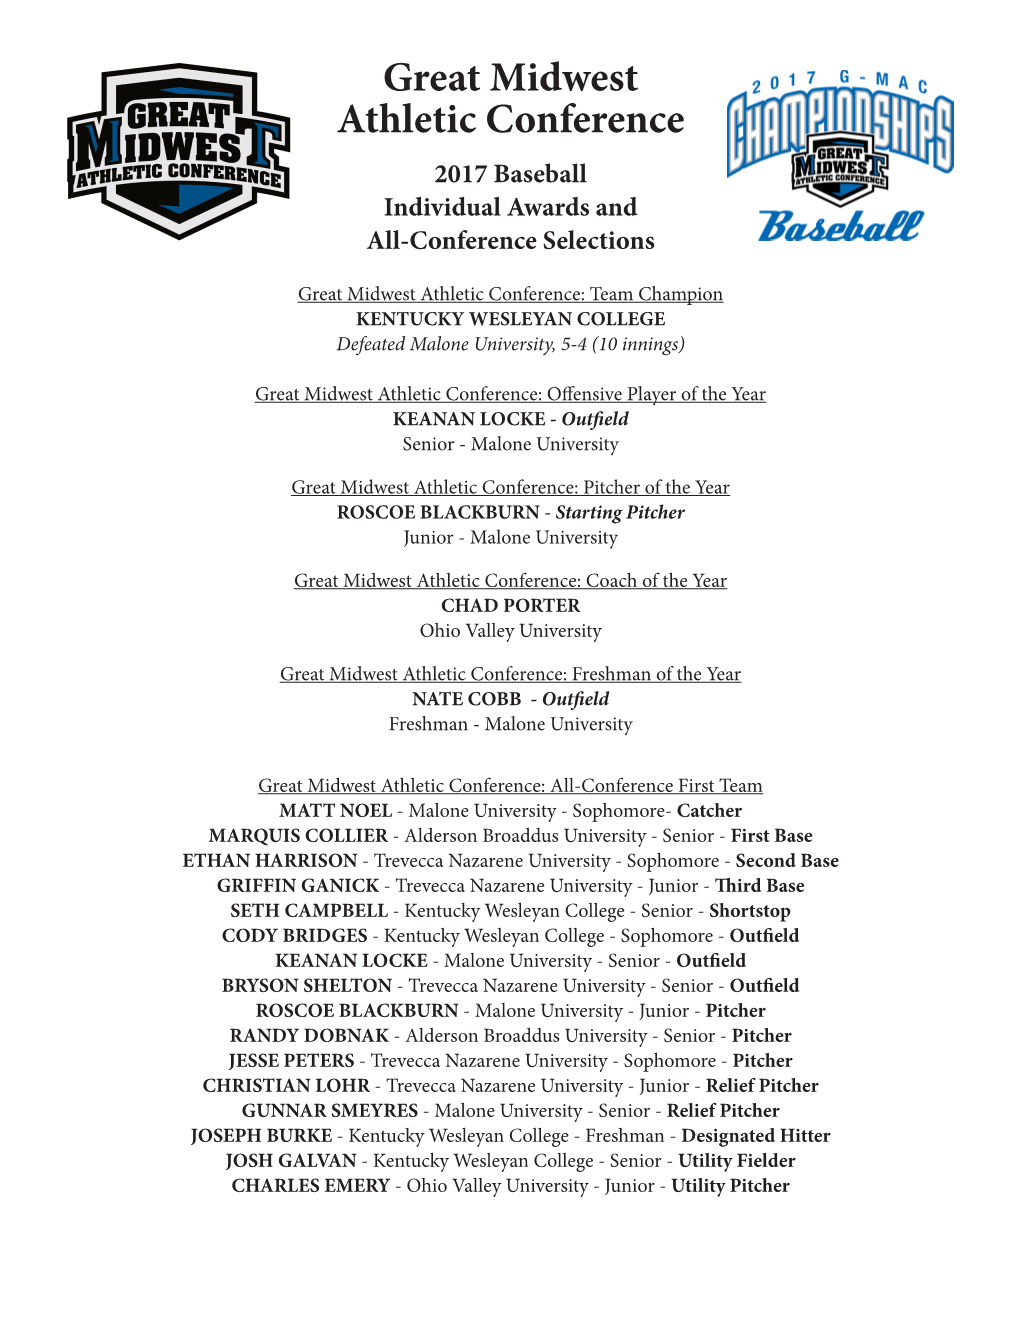 Great Midwest Athletic Conference 2017 Baseball Individual Awards and All-Conference Selections